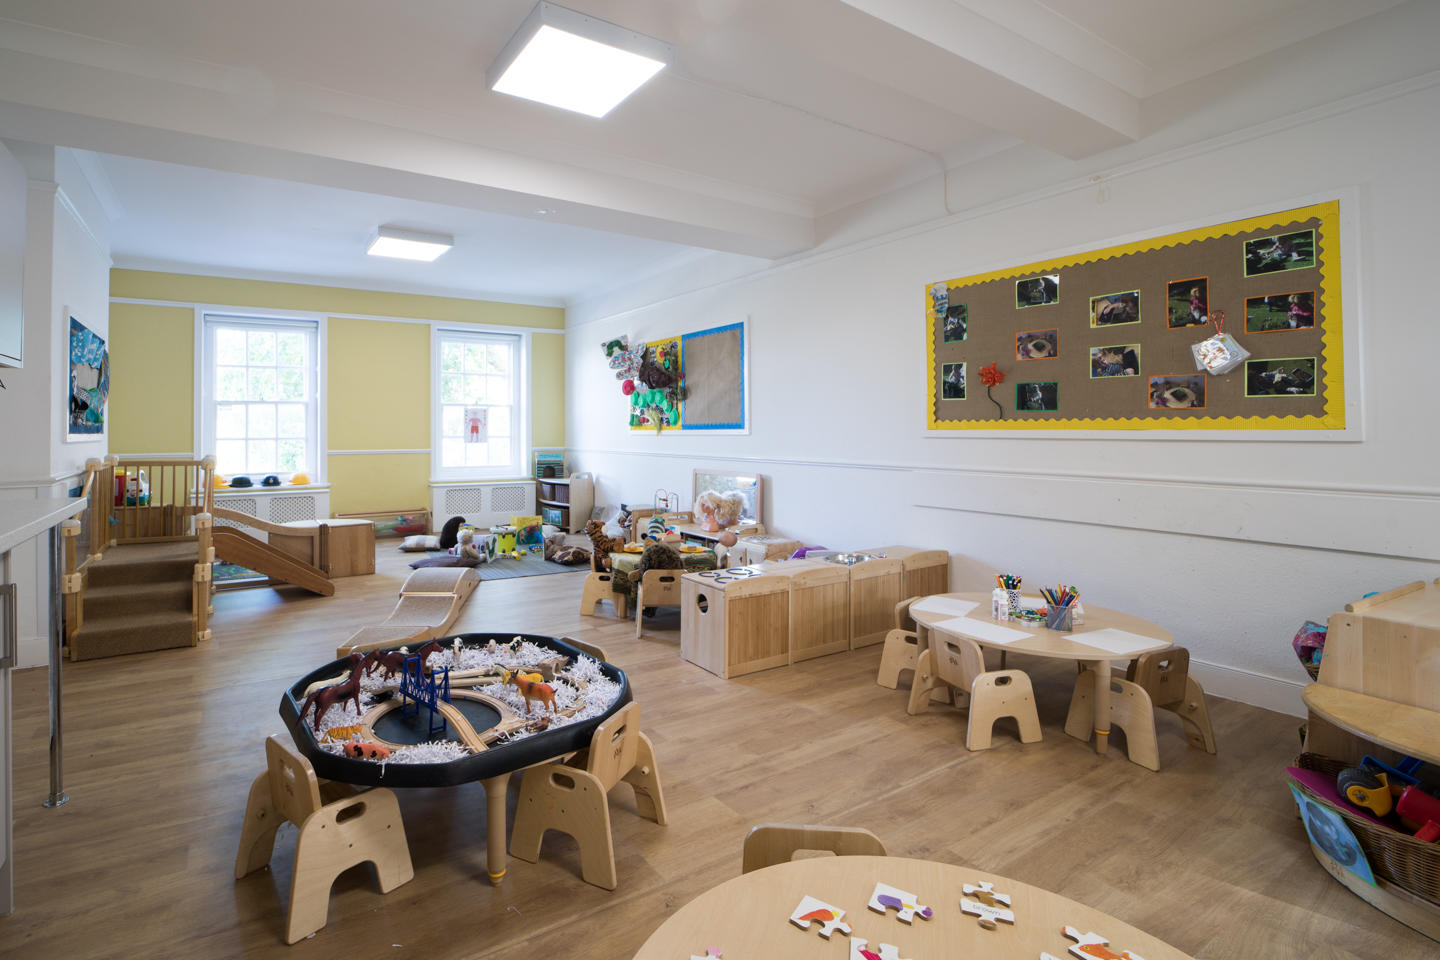 Images Bright Horizons Salcombe Day Nursery and Preschool